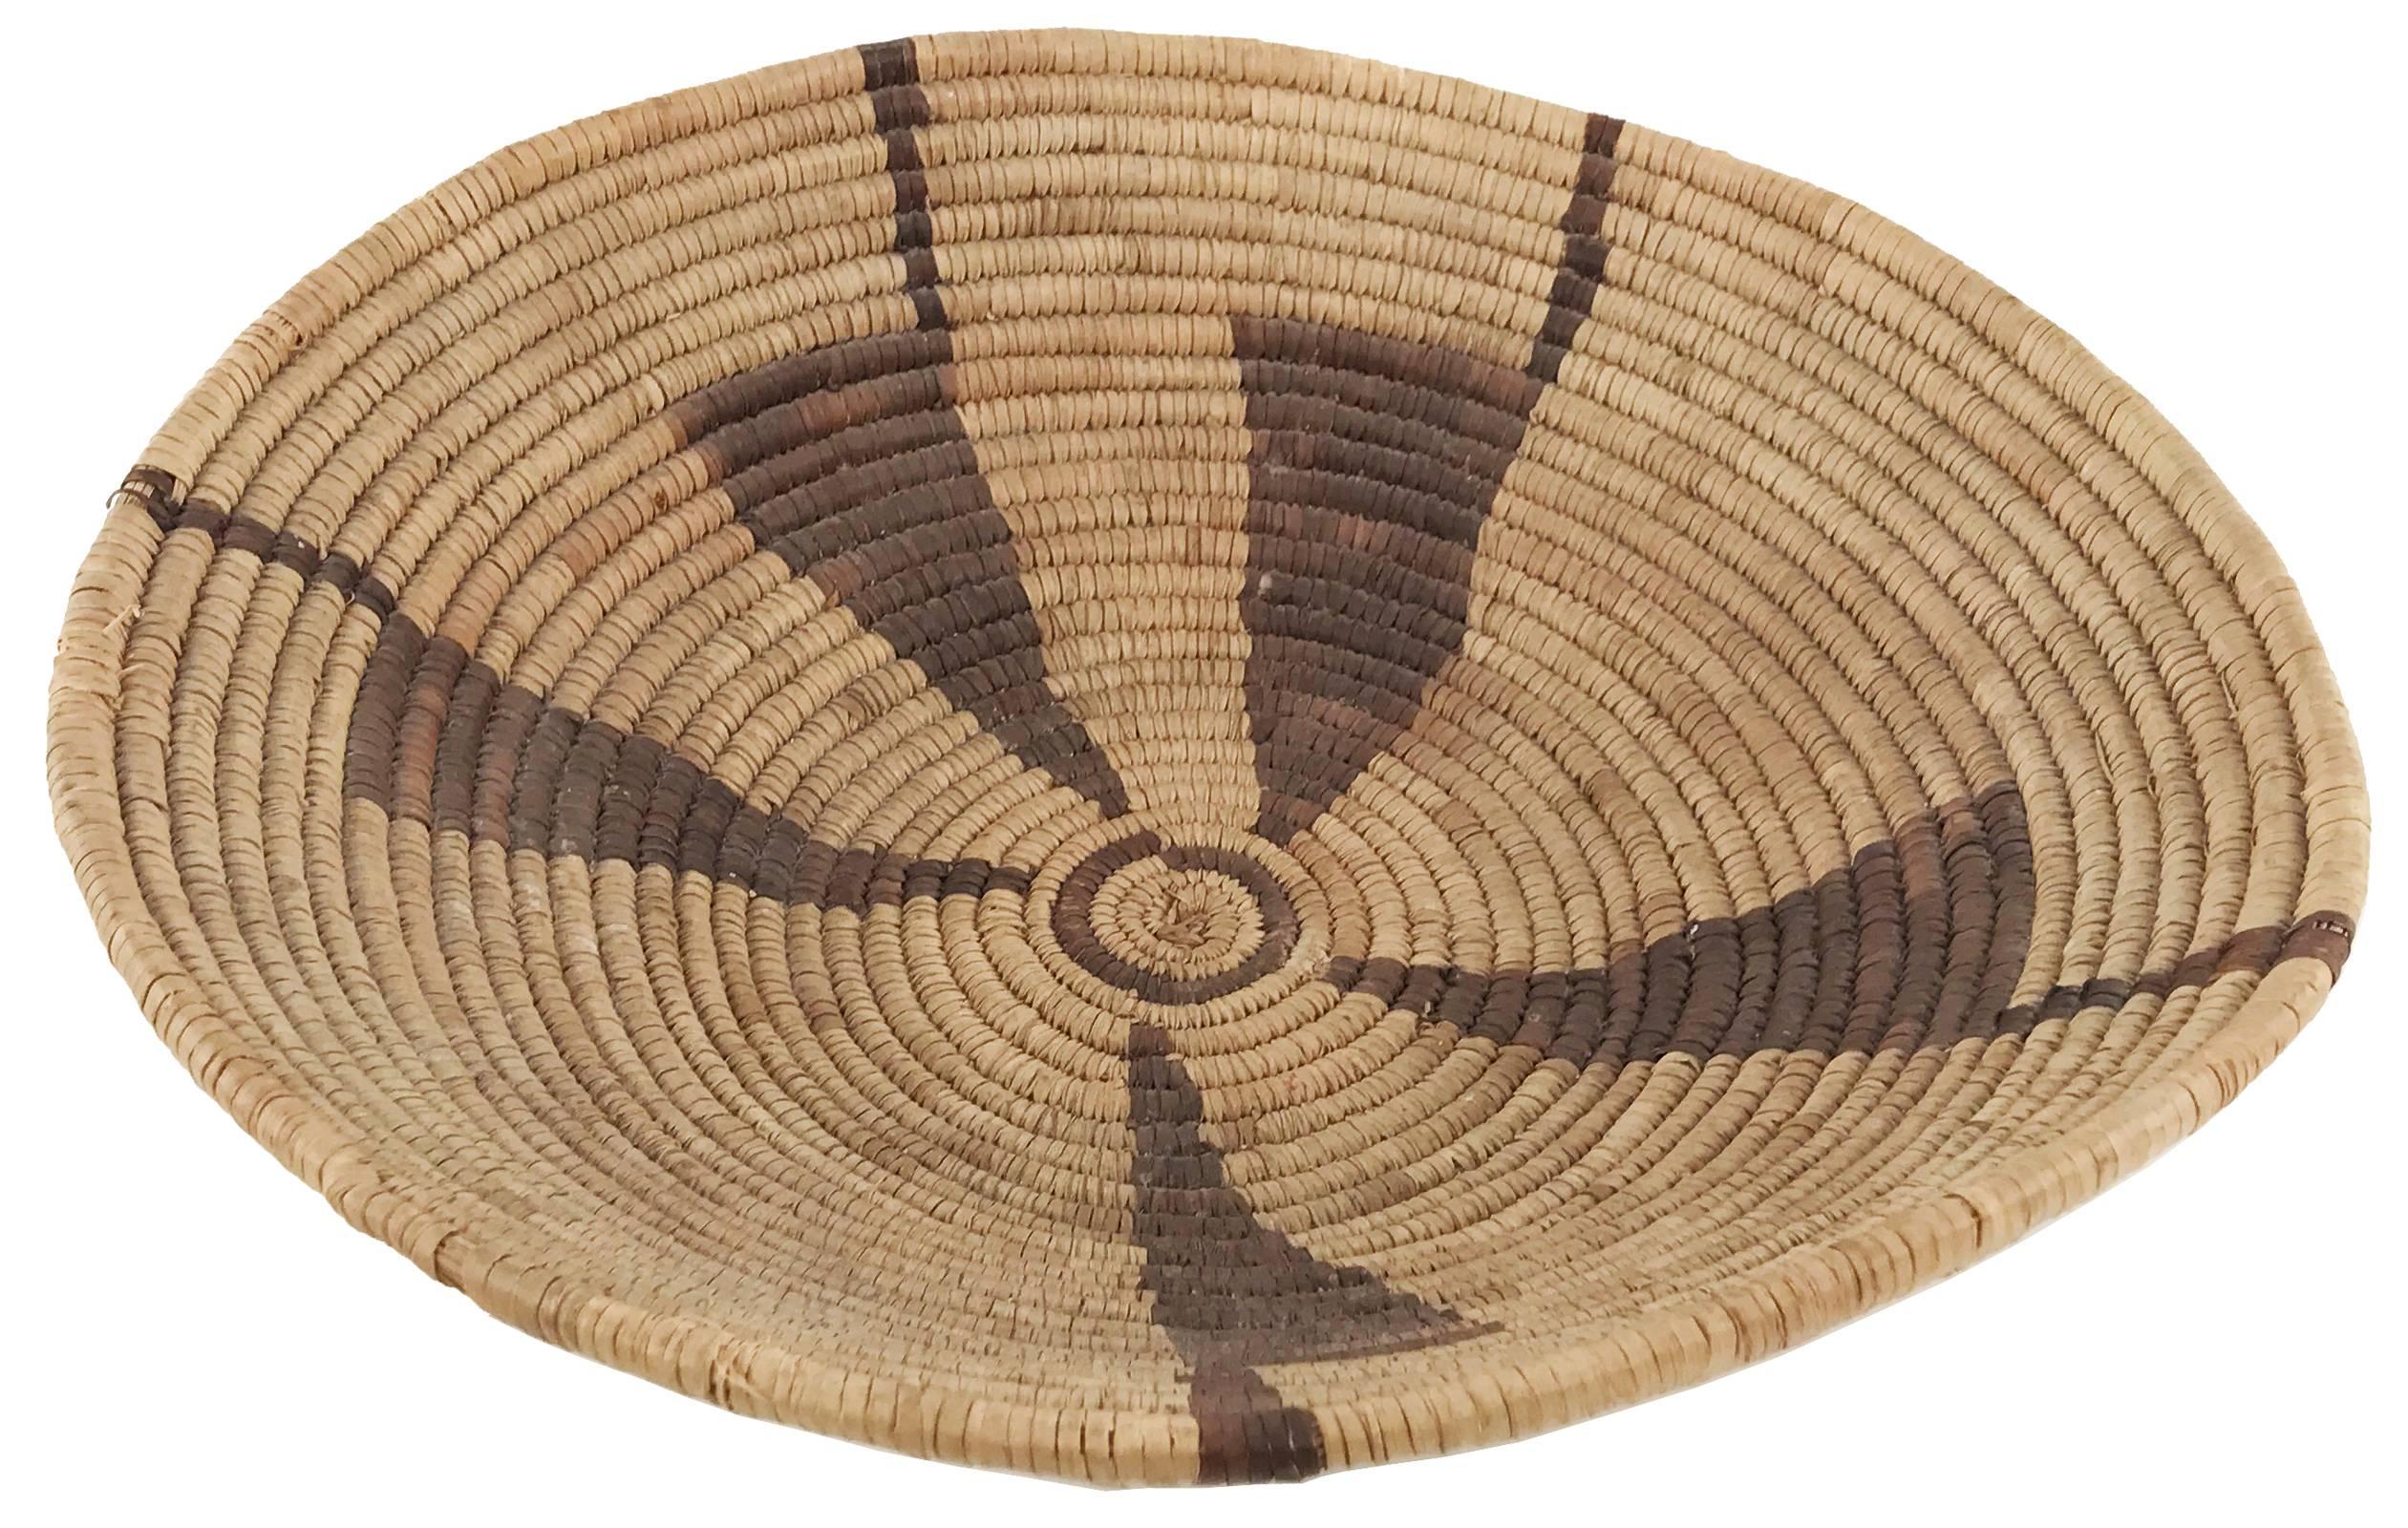 Woven South West Native American Twined Shallow Bowl or Tray